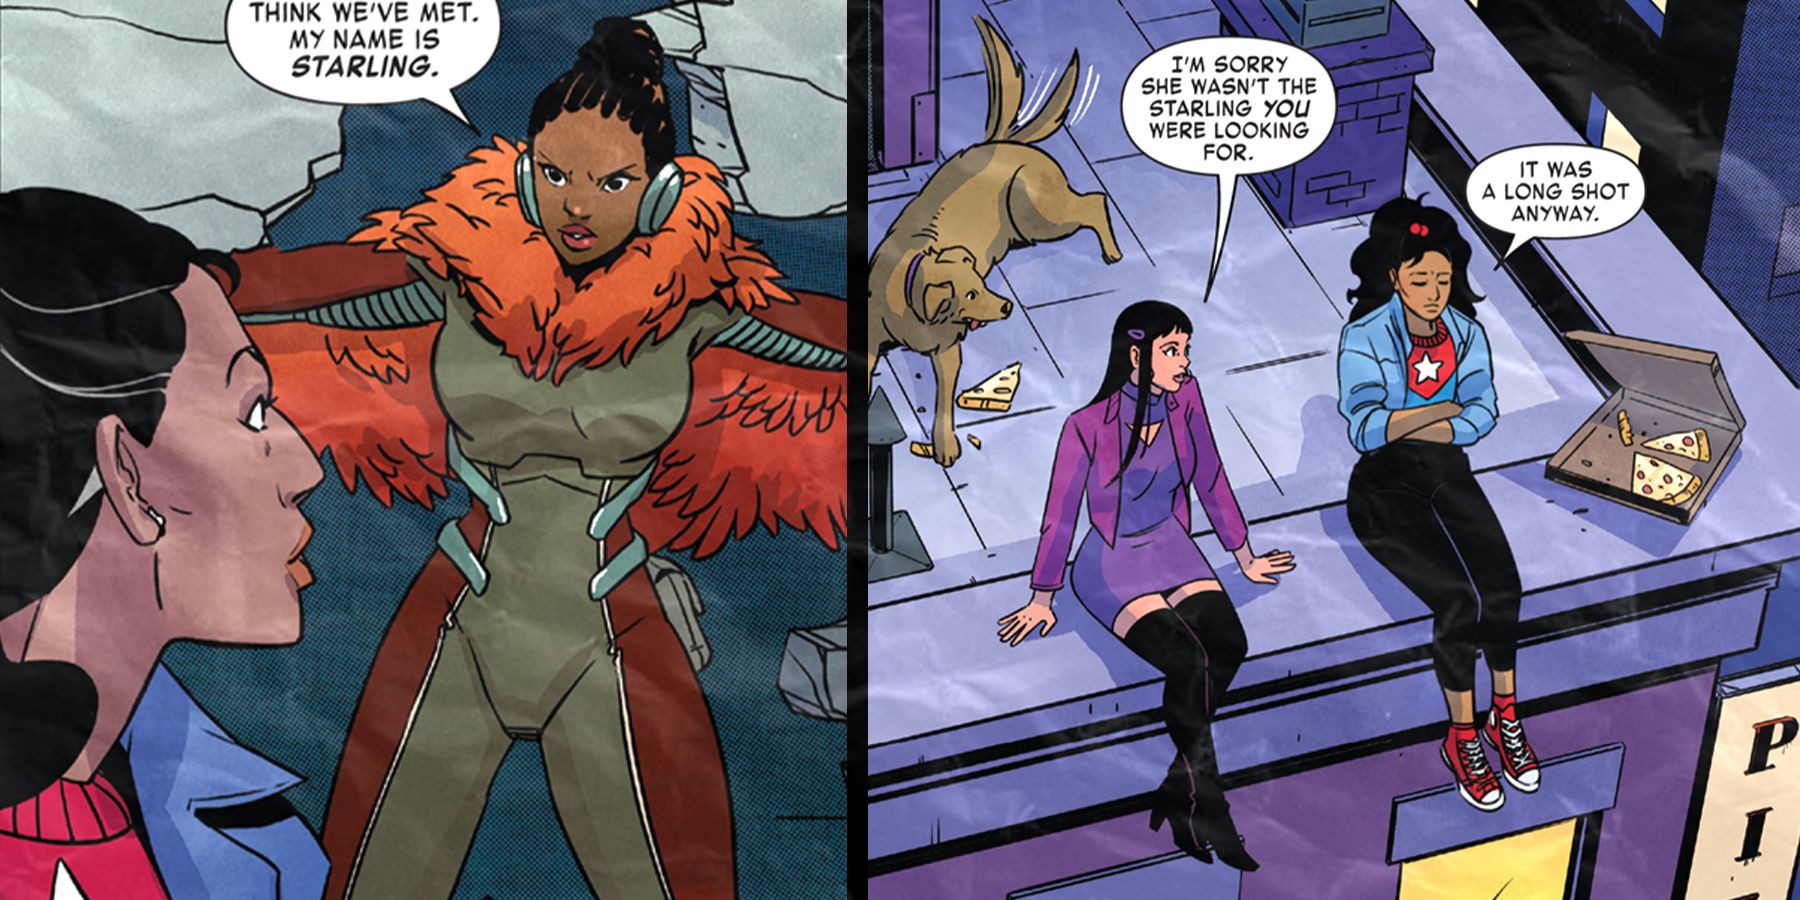 On the left, America Chavez meets Starling for the first time. On the right, Kate Bishop eats pizza with America while sitting on the edge of a building.